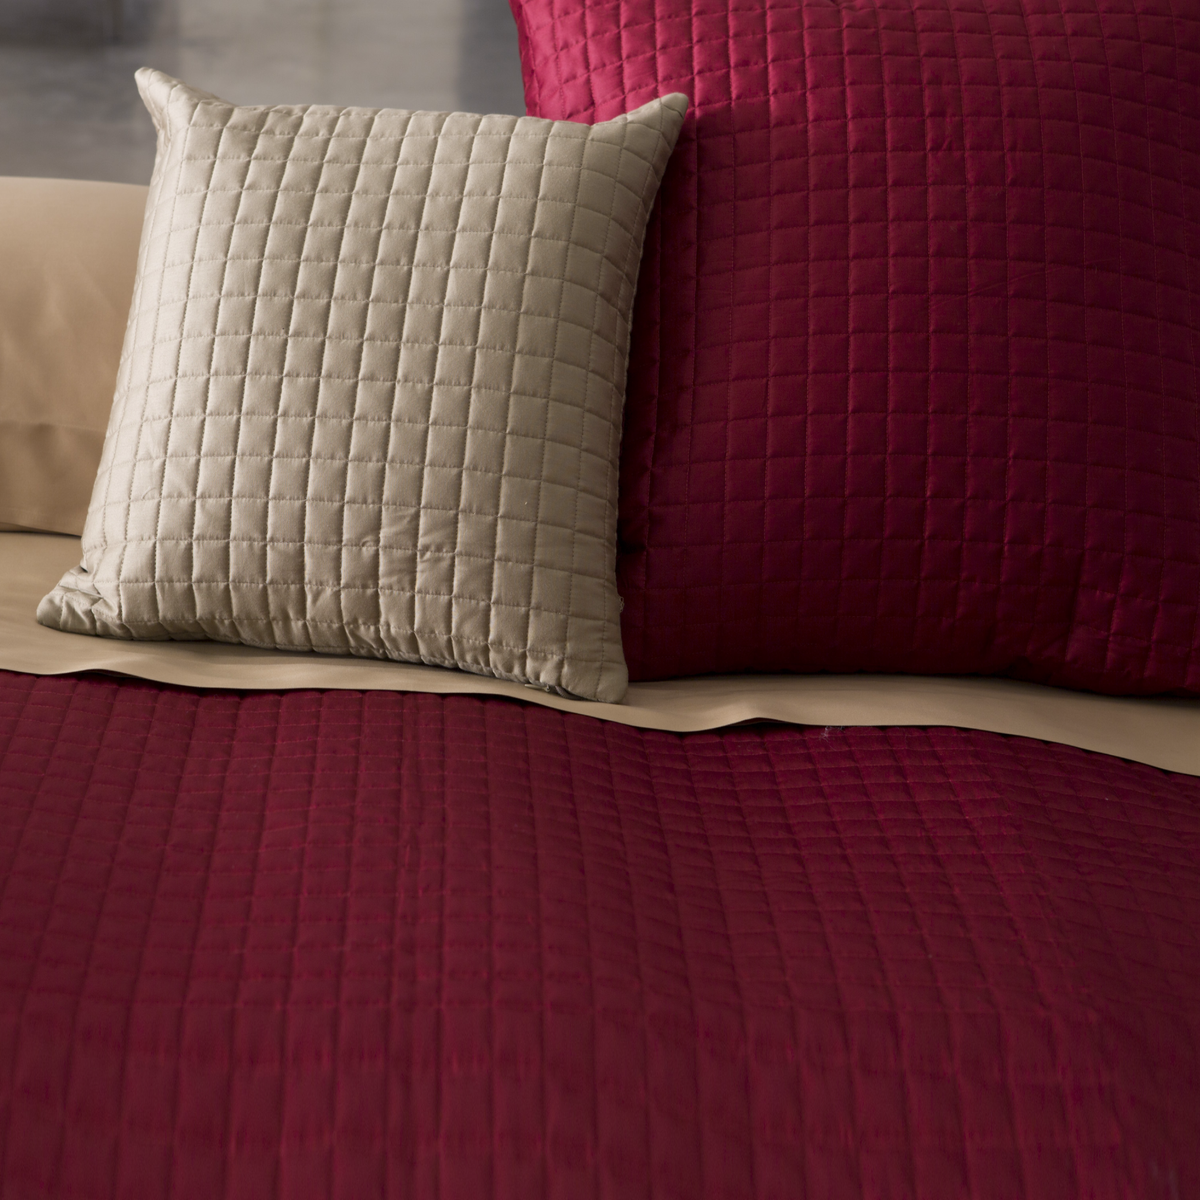 Quilted Shams of Signoria Masaccio Bedding in Different Colors